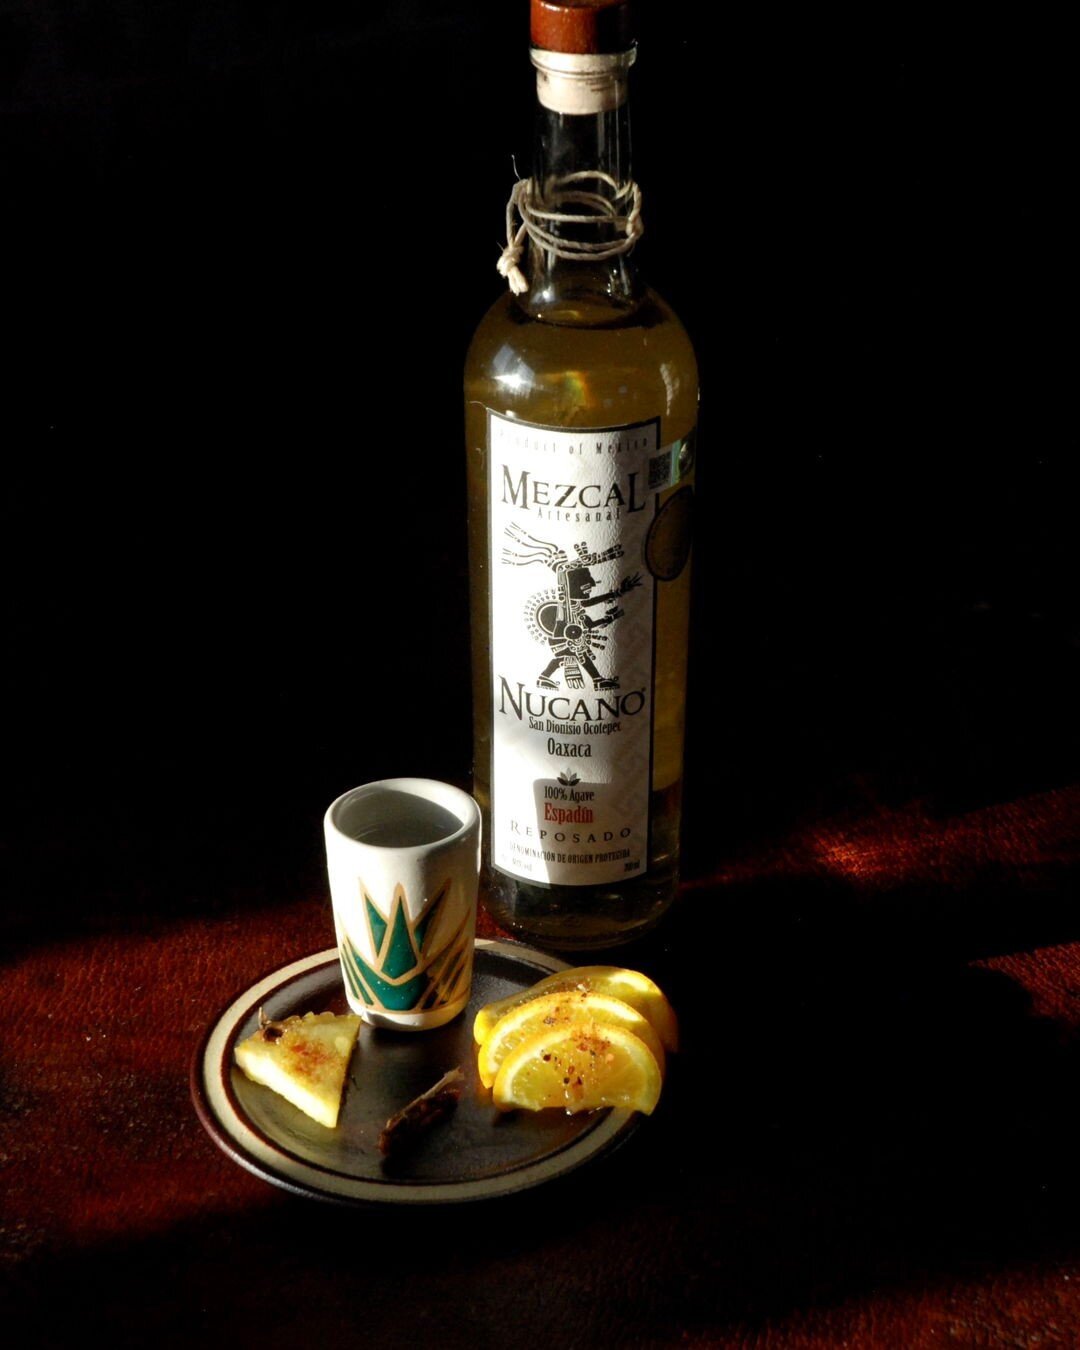 Mezcal Nucano an artisanal mezcal from the San Dionisio Ocotepec region of the state of Oaxaca.

This bottle is made of 100% Espad&iacute;n agave. The agave matures for eight years before it is harvested. Once the distillation process is complete it 